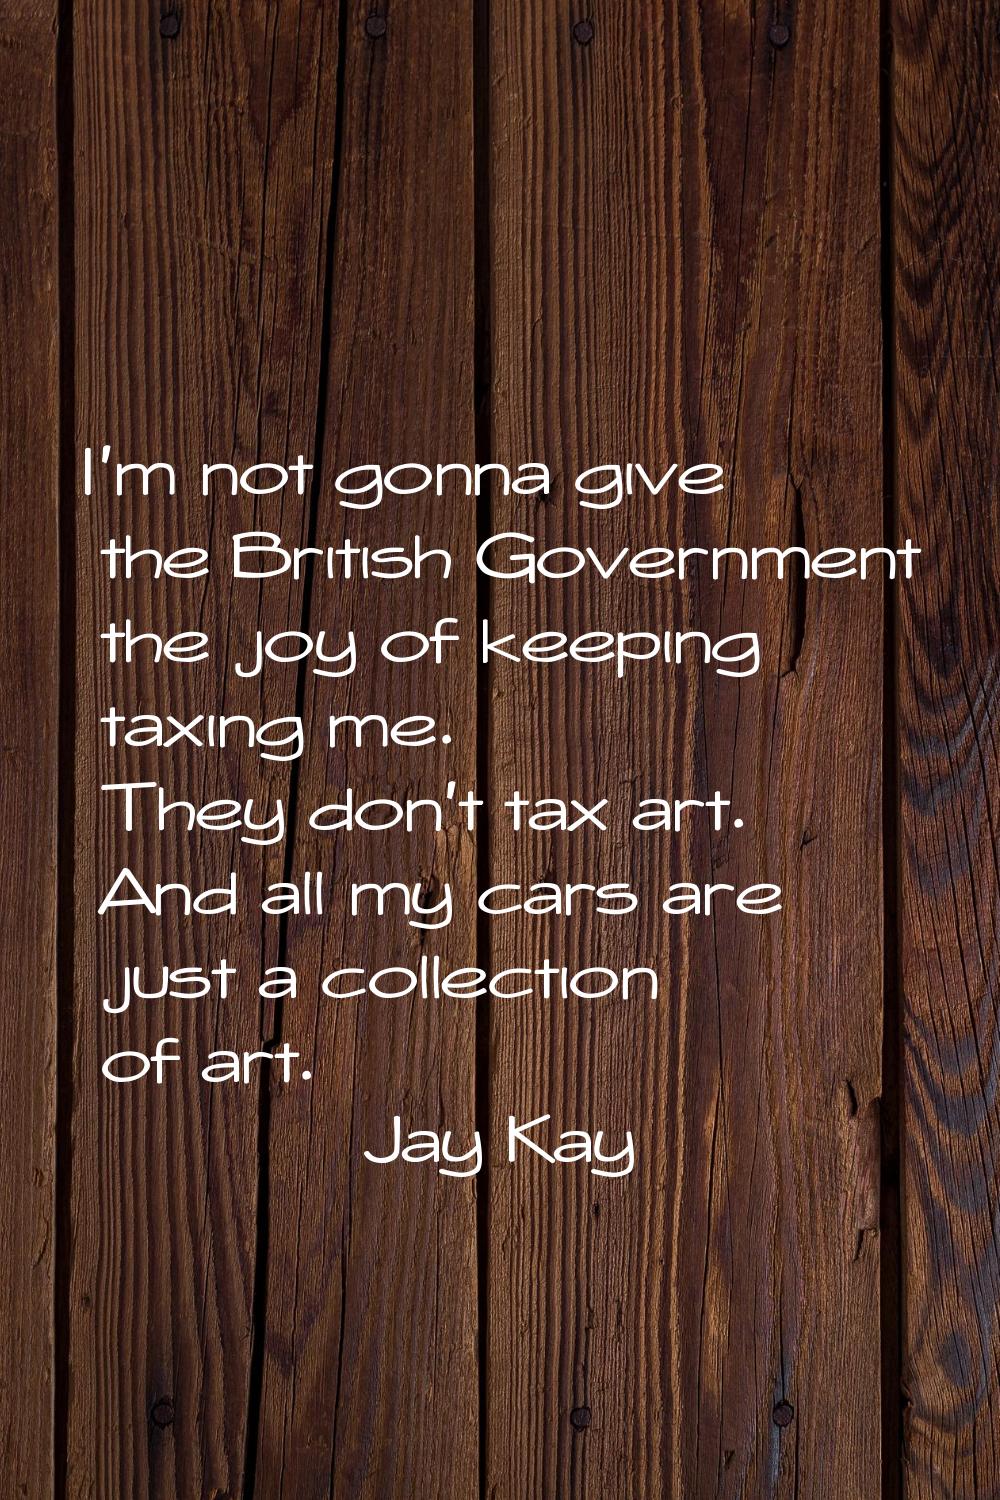 I'm not gonna give the British Government the joy of keeping taxing me. They don't tax art. And all